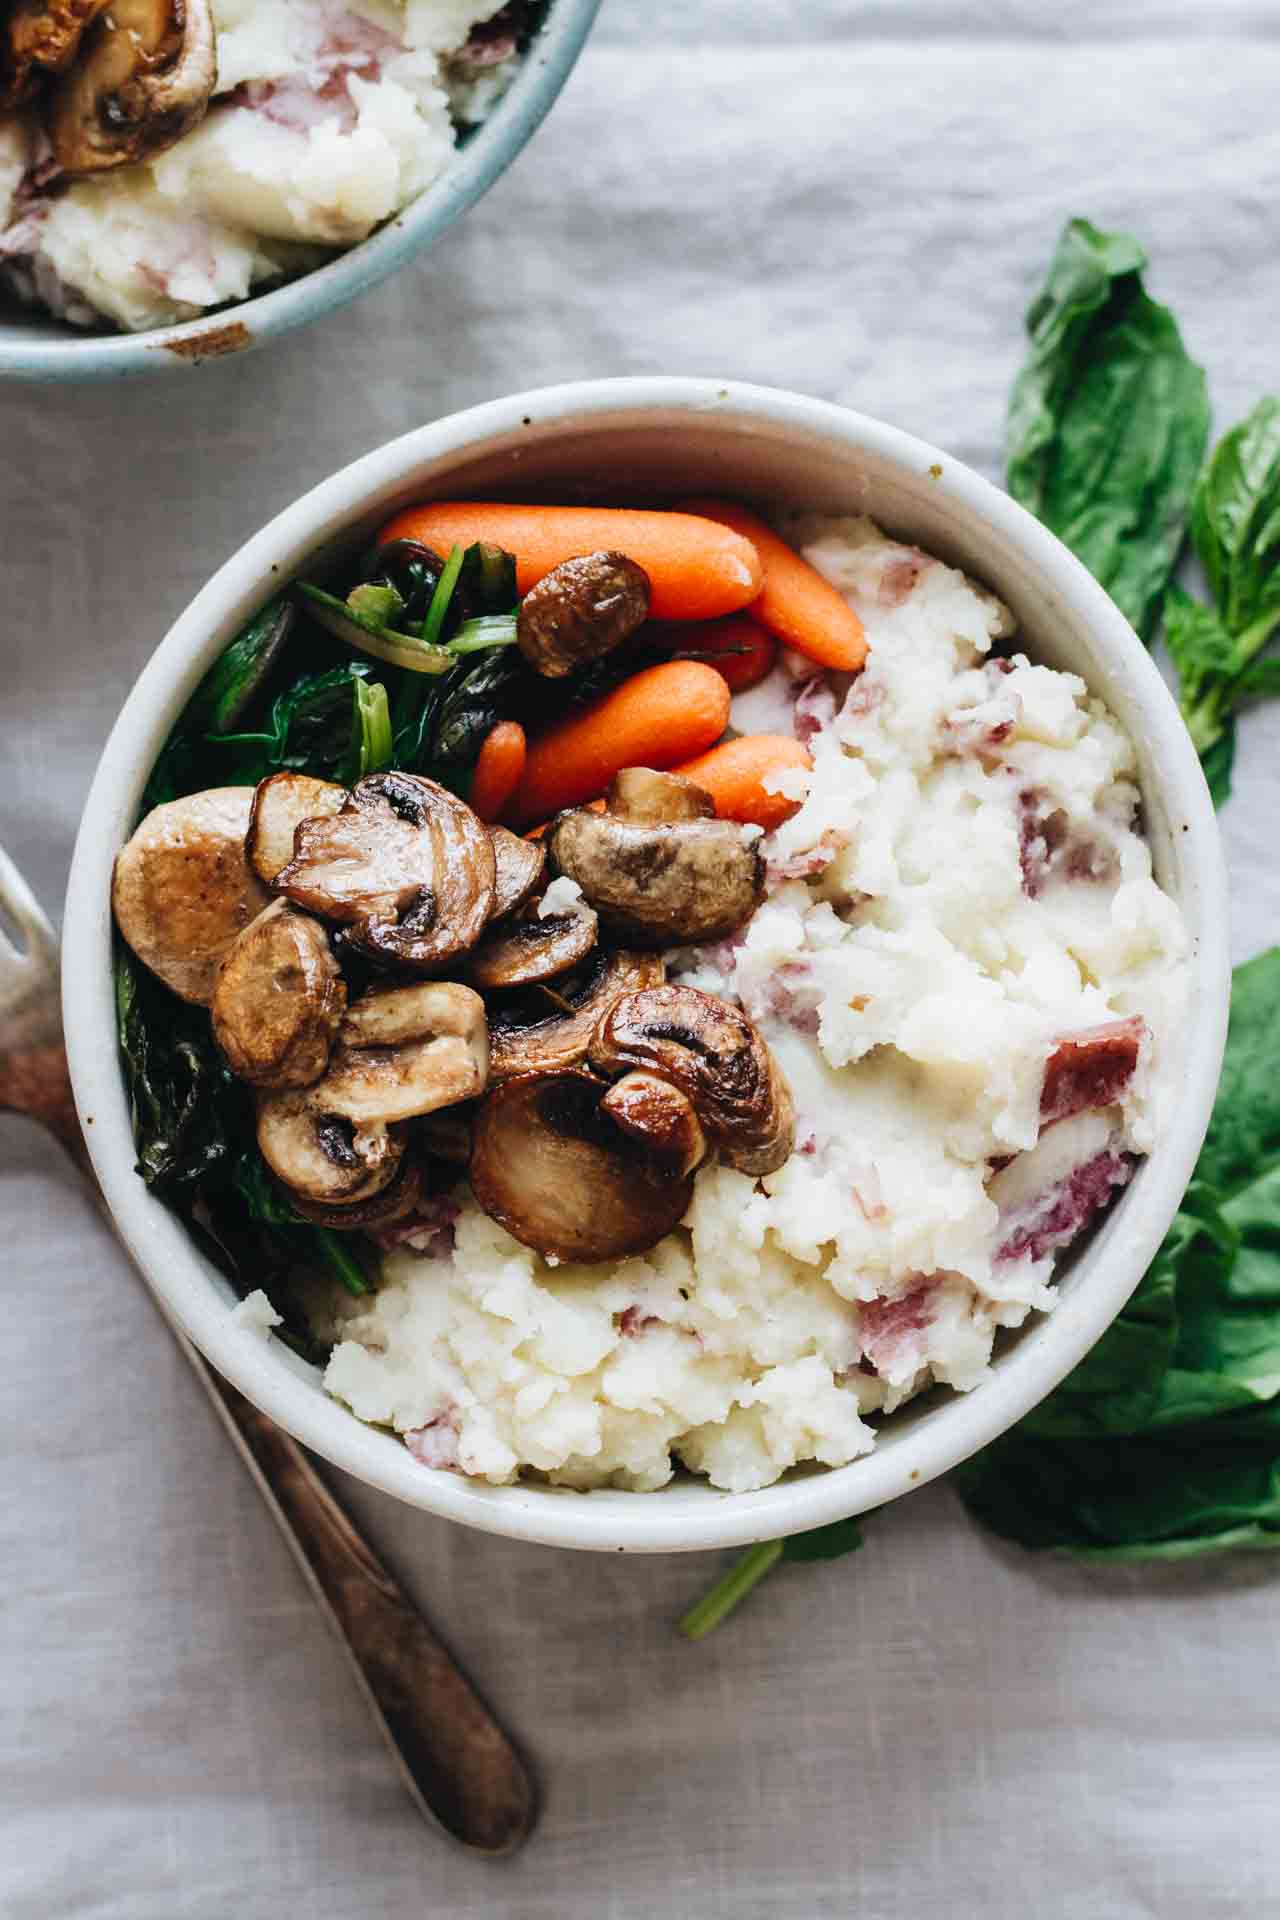 Vegan Mashed Potato Bowl // Mashed potato is a really nice alternative for pasta since it's comforting but without empty calories. With some veggies and mushroom, you have yourself a healthy dinner. | The Green Loot #vegan #mushroom